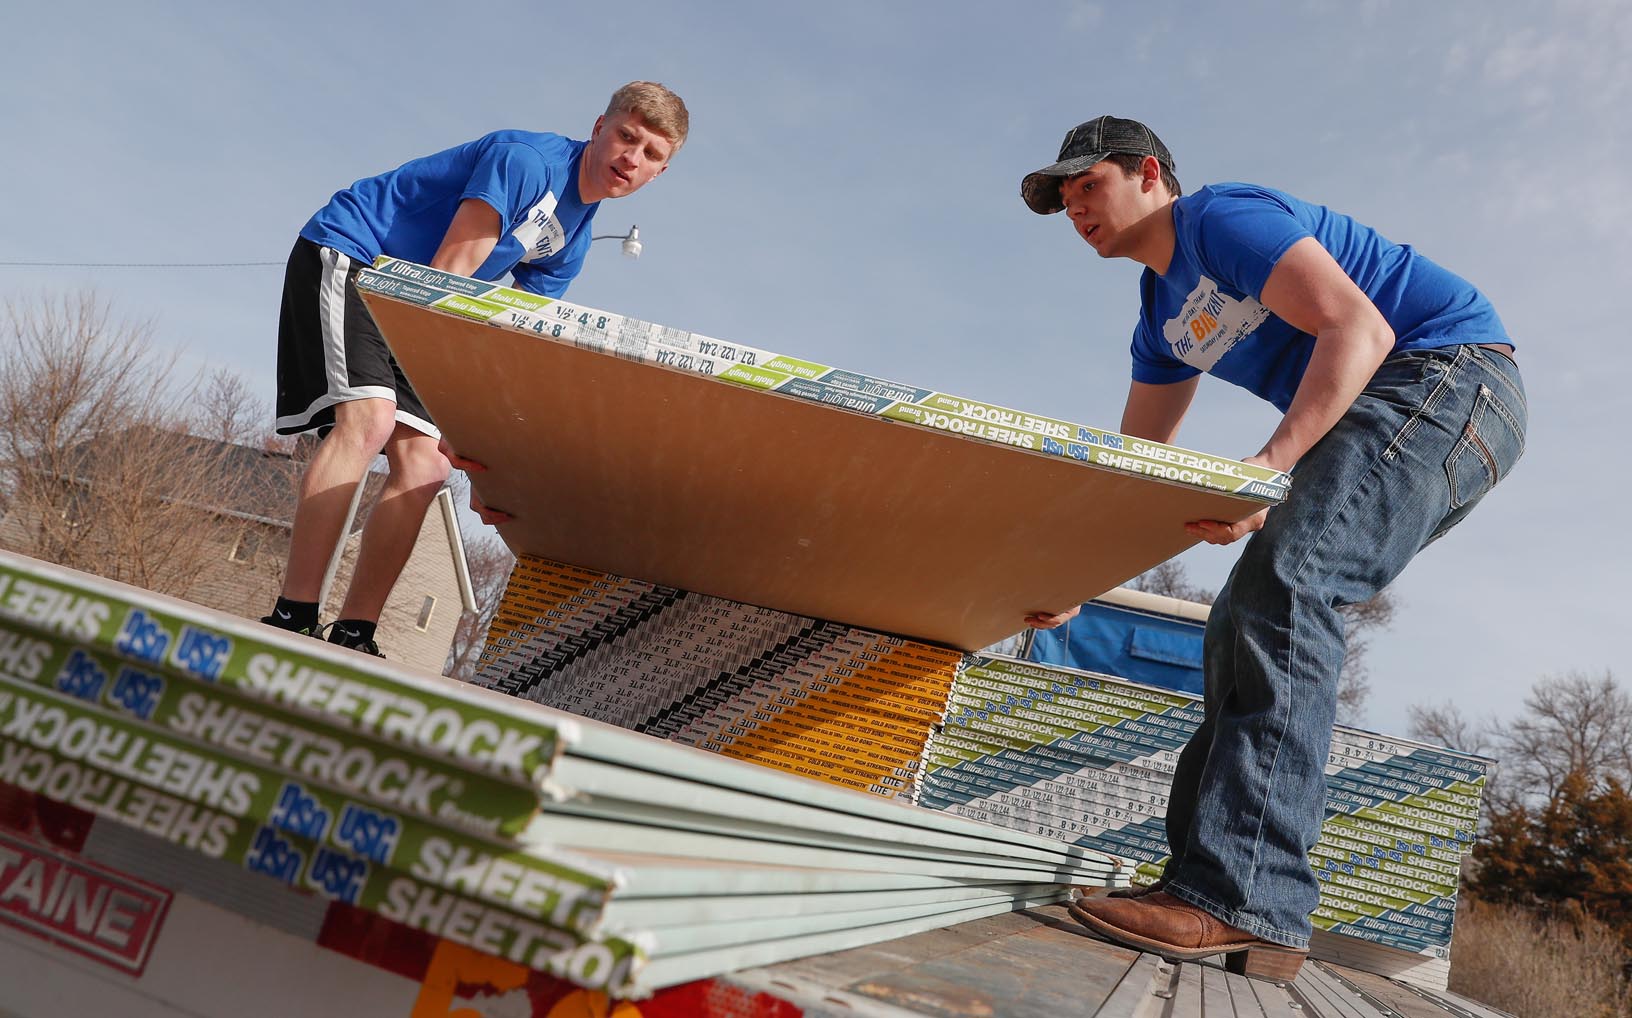 UNK students Zach Ciborn of Columbus, left, and Riley Mrkvicka of Farwell load Sheetrock off a semitrailer Saturday while helping with flood recovery efforts in Gibbon. They joined 500 other University of Nebraska at Kearney students who volunteered in Kearney and area communities as part of UNK’s The Big Event. (Photo by Corbey R. Dorsey, UNK Communications)